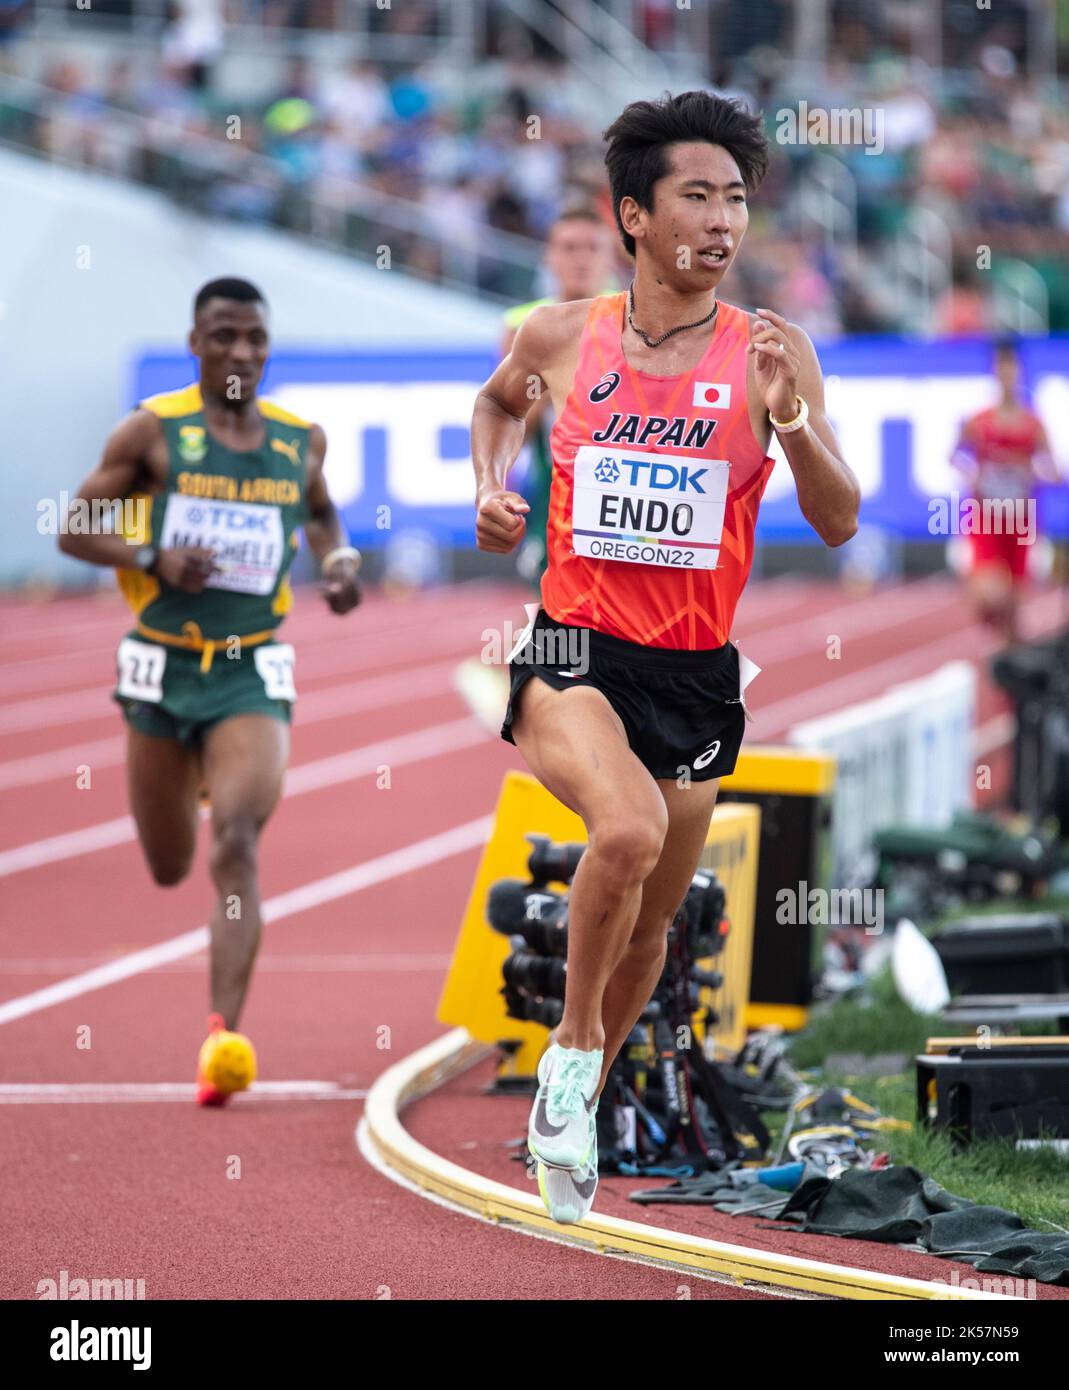 Hyuga Eendo of Japan competing in the men’s 5000m heats at the World Athletics Championships, Hayward Field, Eugene, Oregon USA on the 21st July 2022. Stock Photo